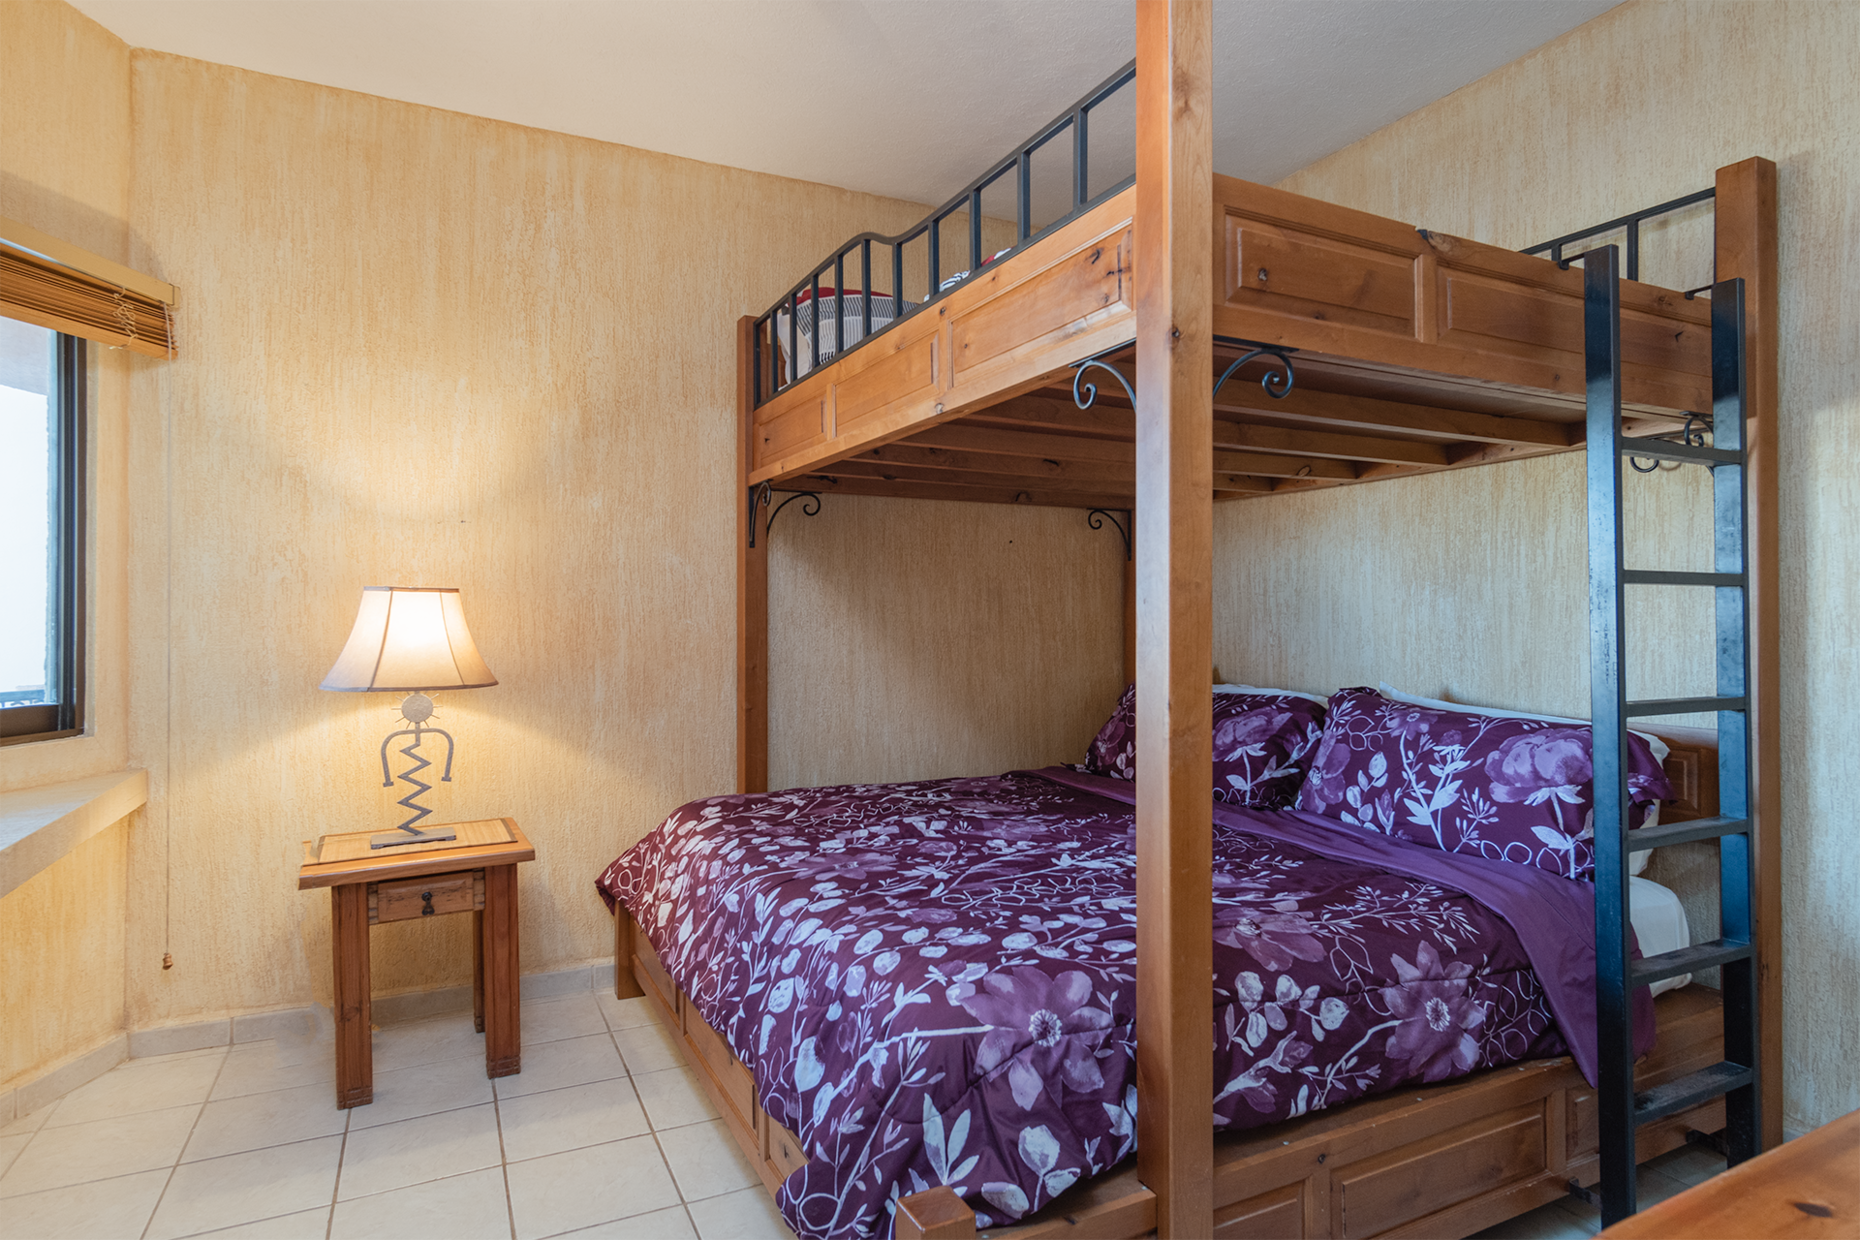 Guest bedroom has these great bunk beds.